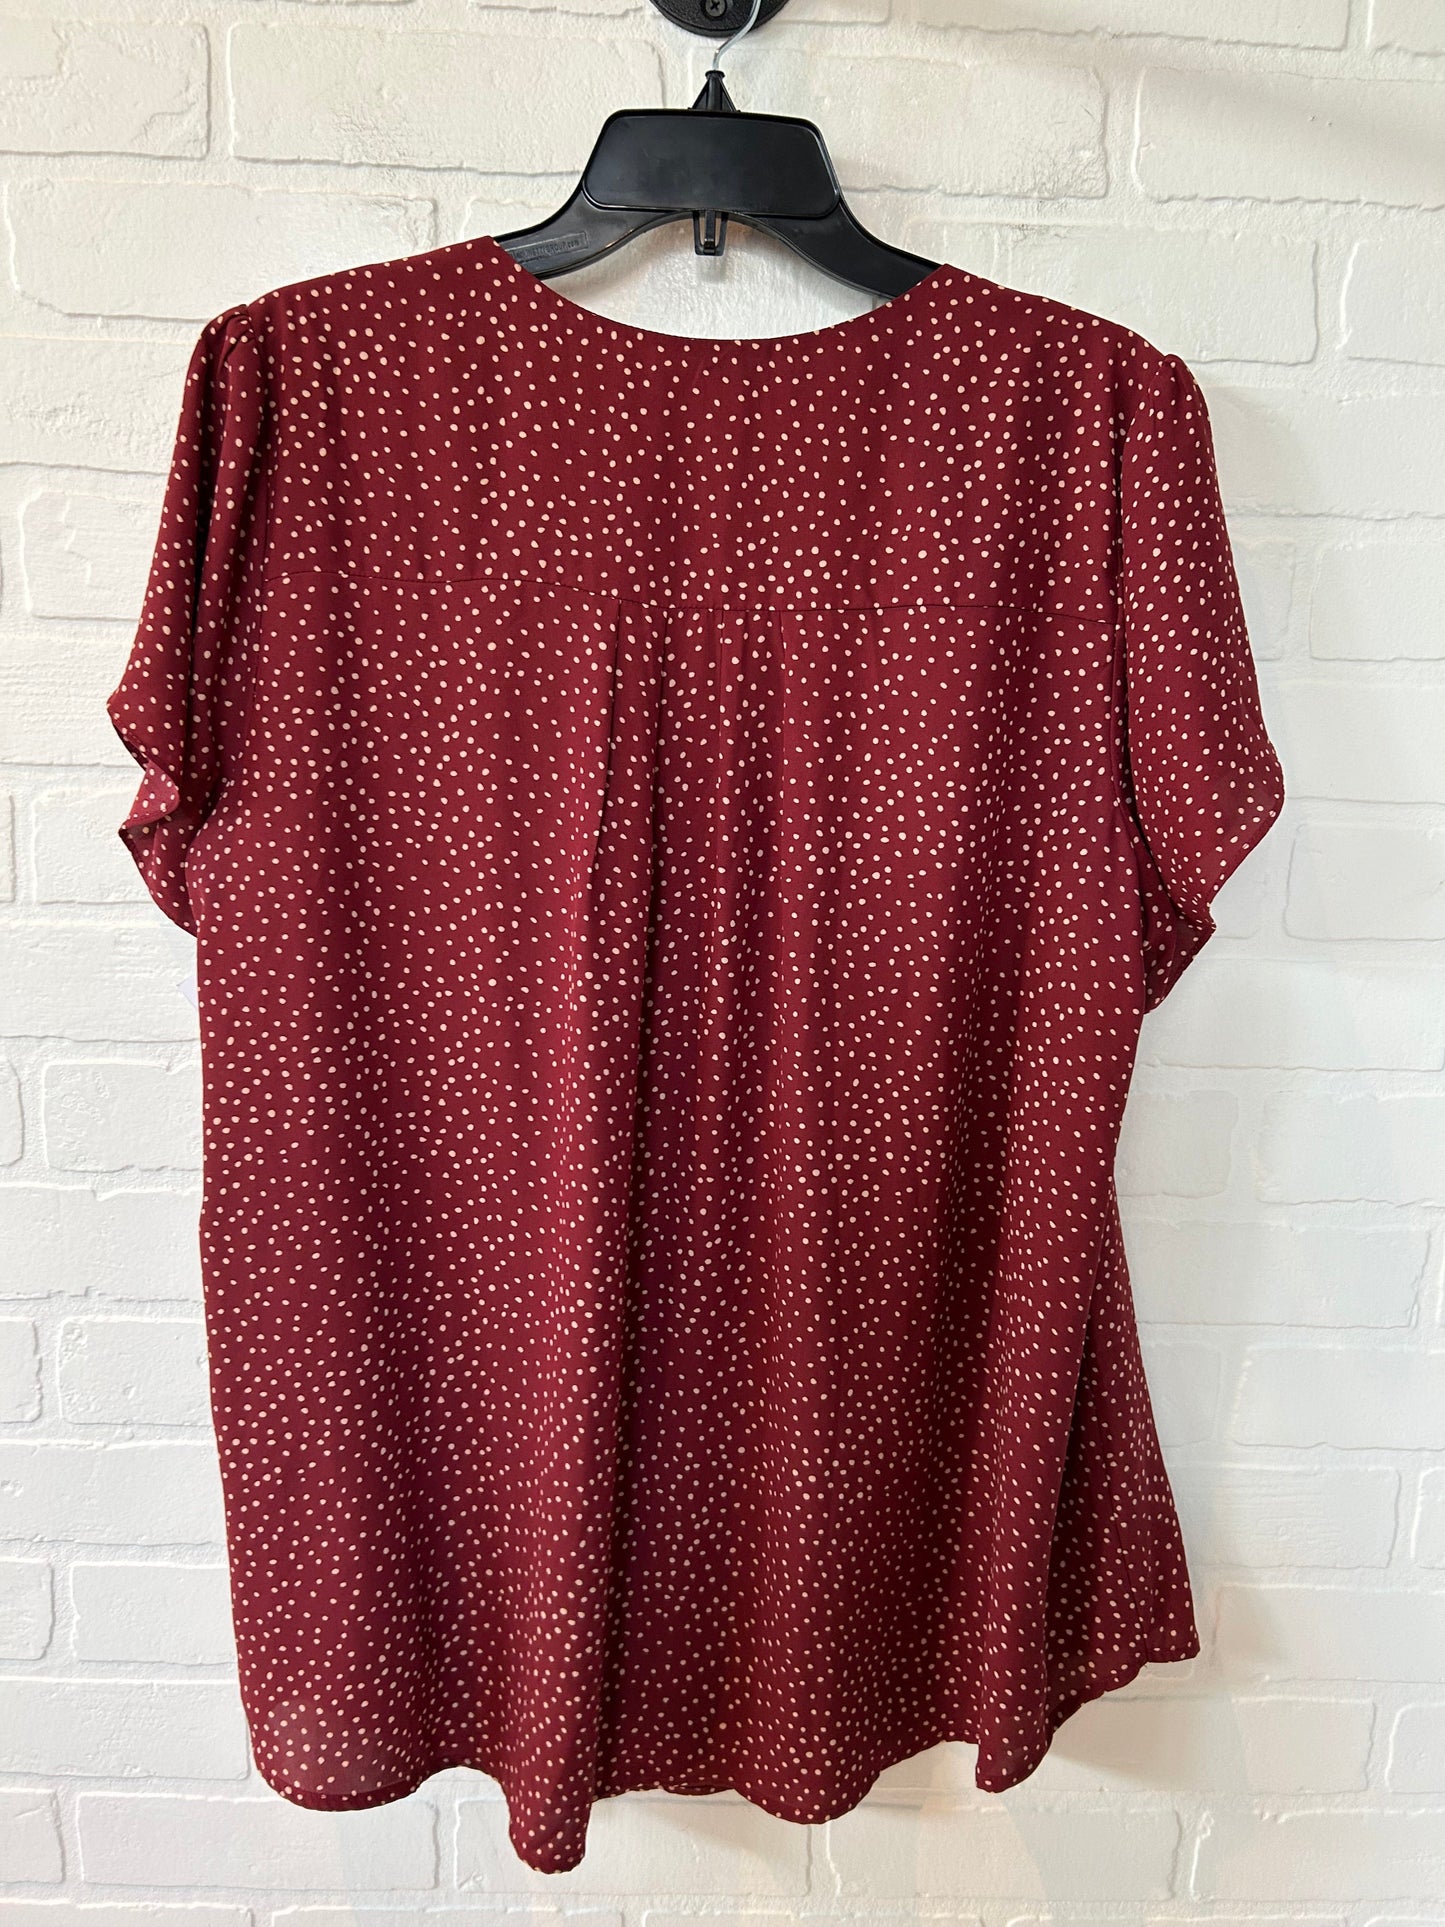 Red Top Short Sleeve 41 Hawthorn, Size 2x